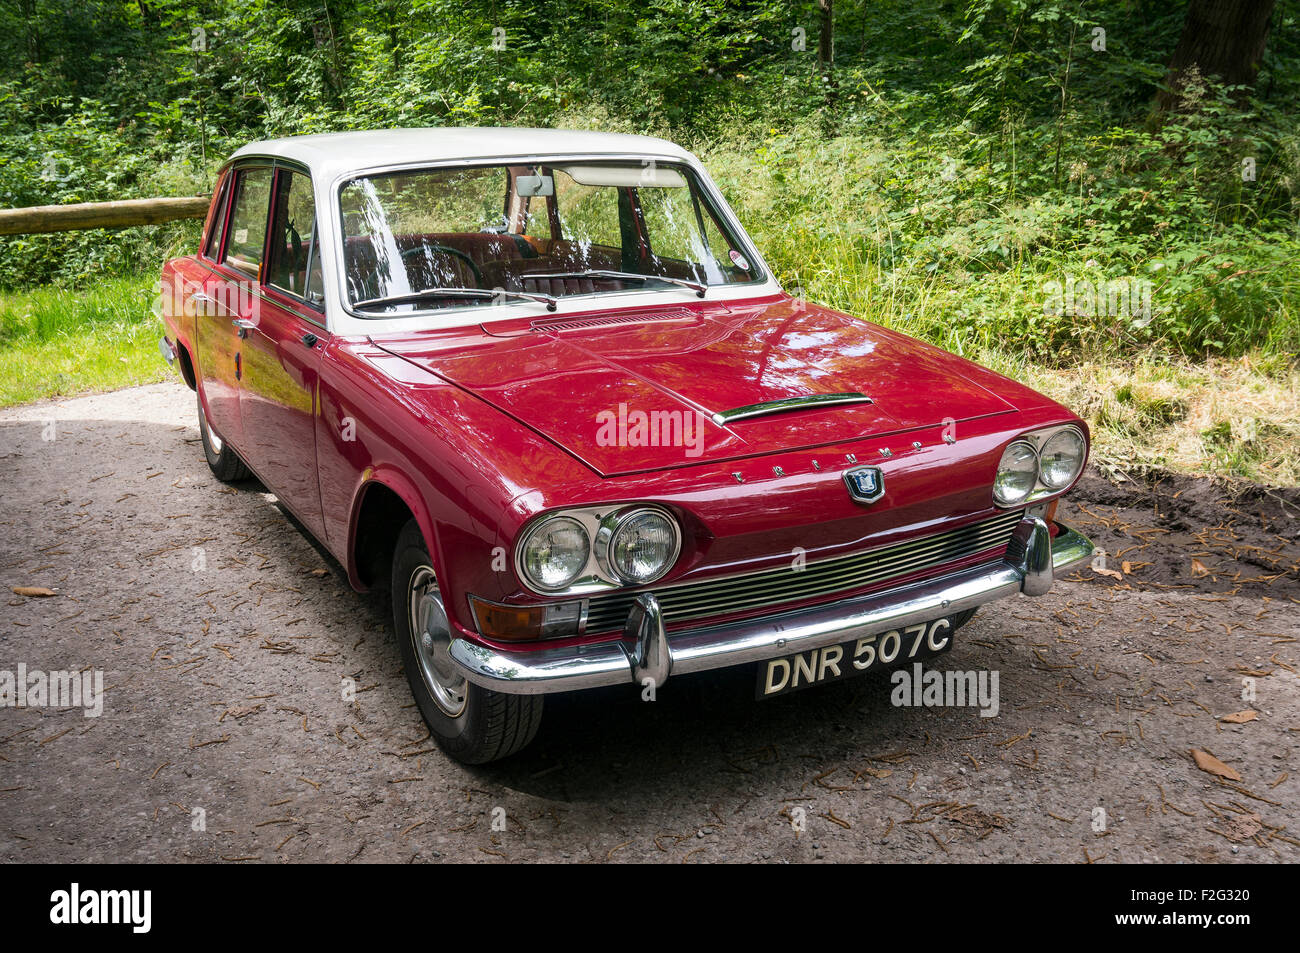 Nice example of a classic 1965 Triumph 2000 in Savernake Forest near Marlborough, Wiltshire, UK Stock Photo